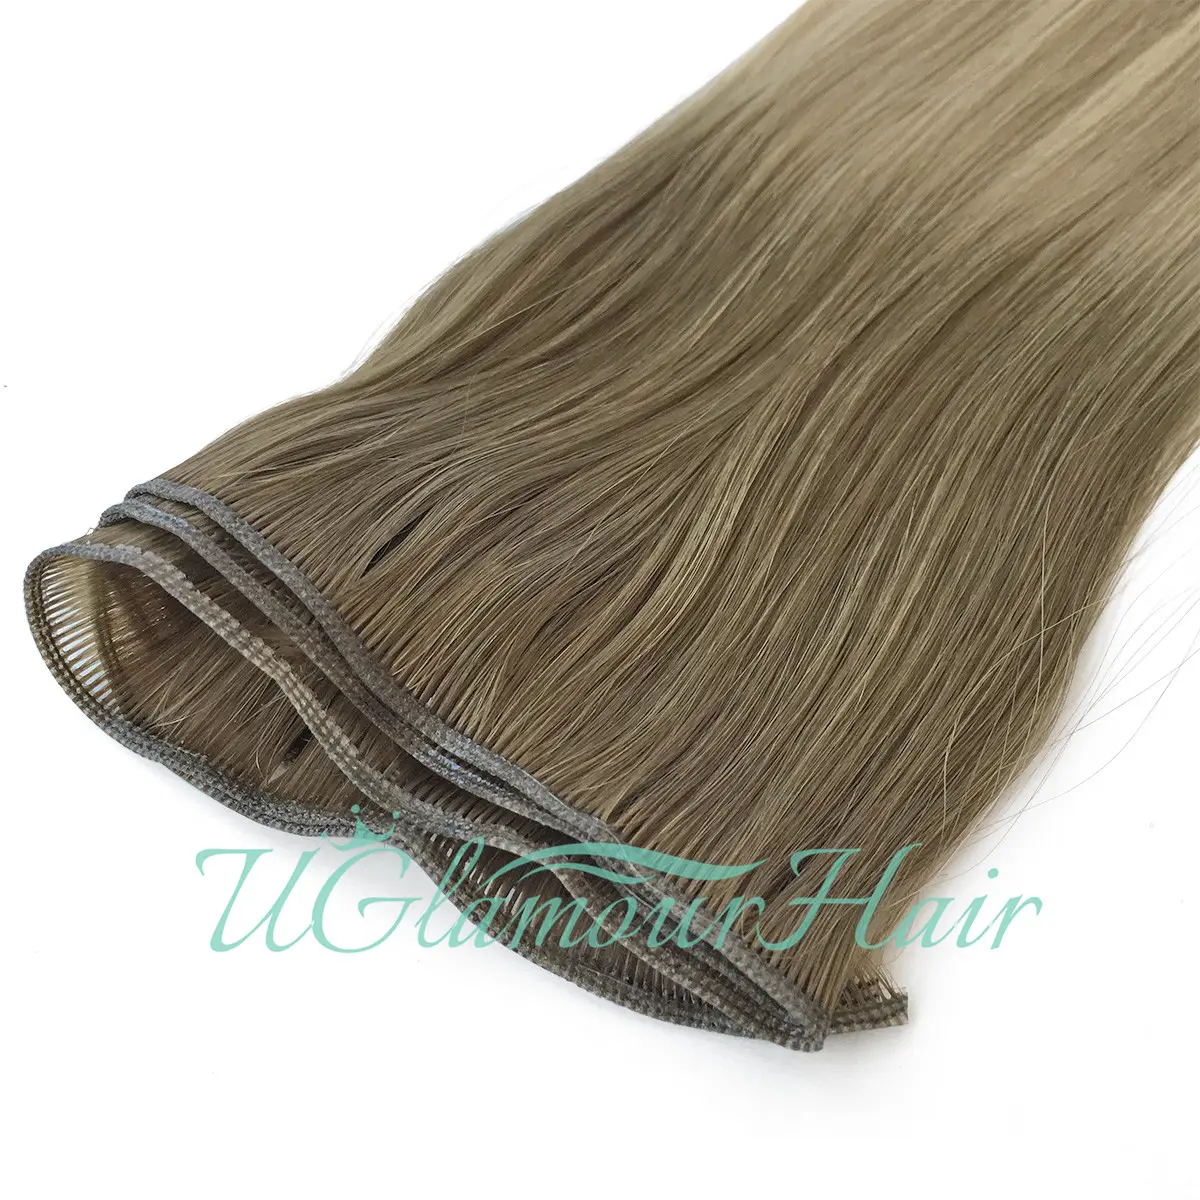 Factory Hot Selling 100% Human Virgin Remy Russian Hair Genius weft hair extensions